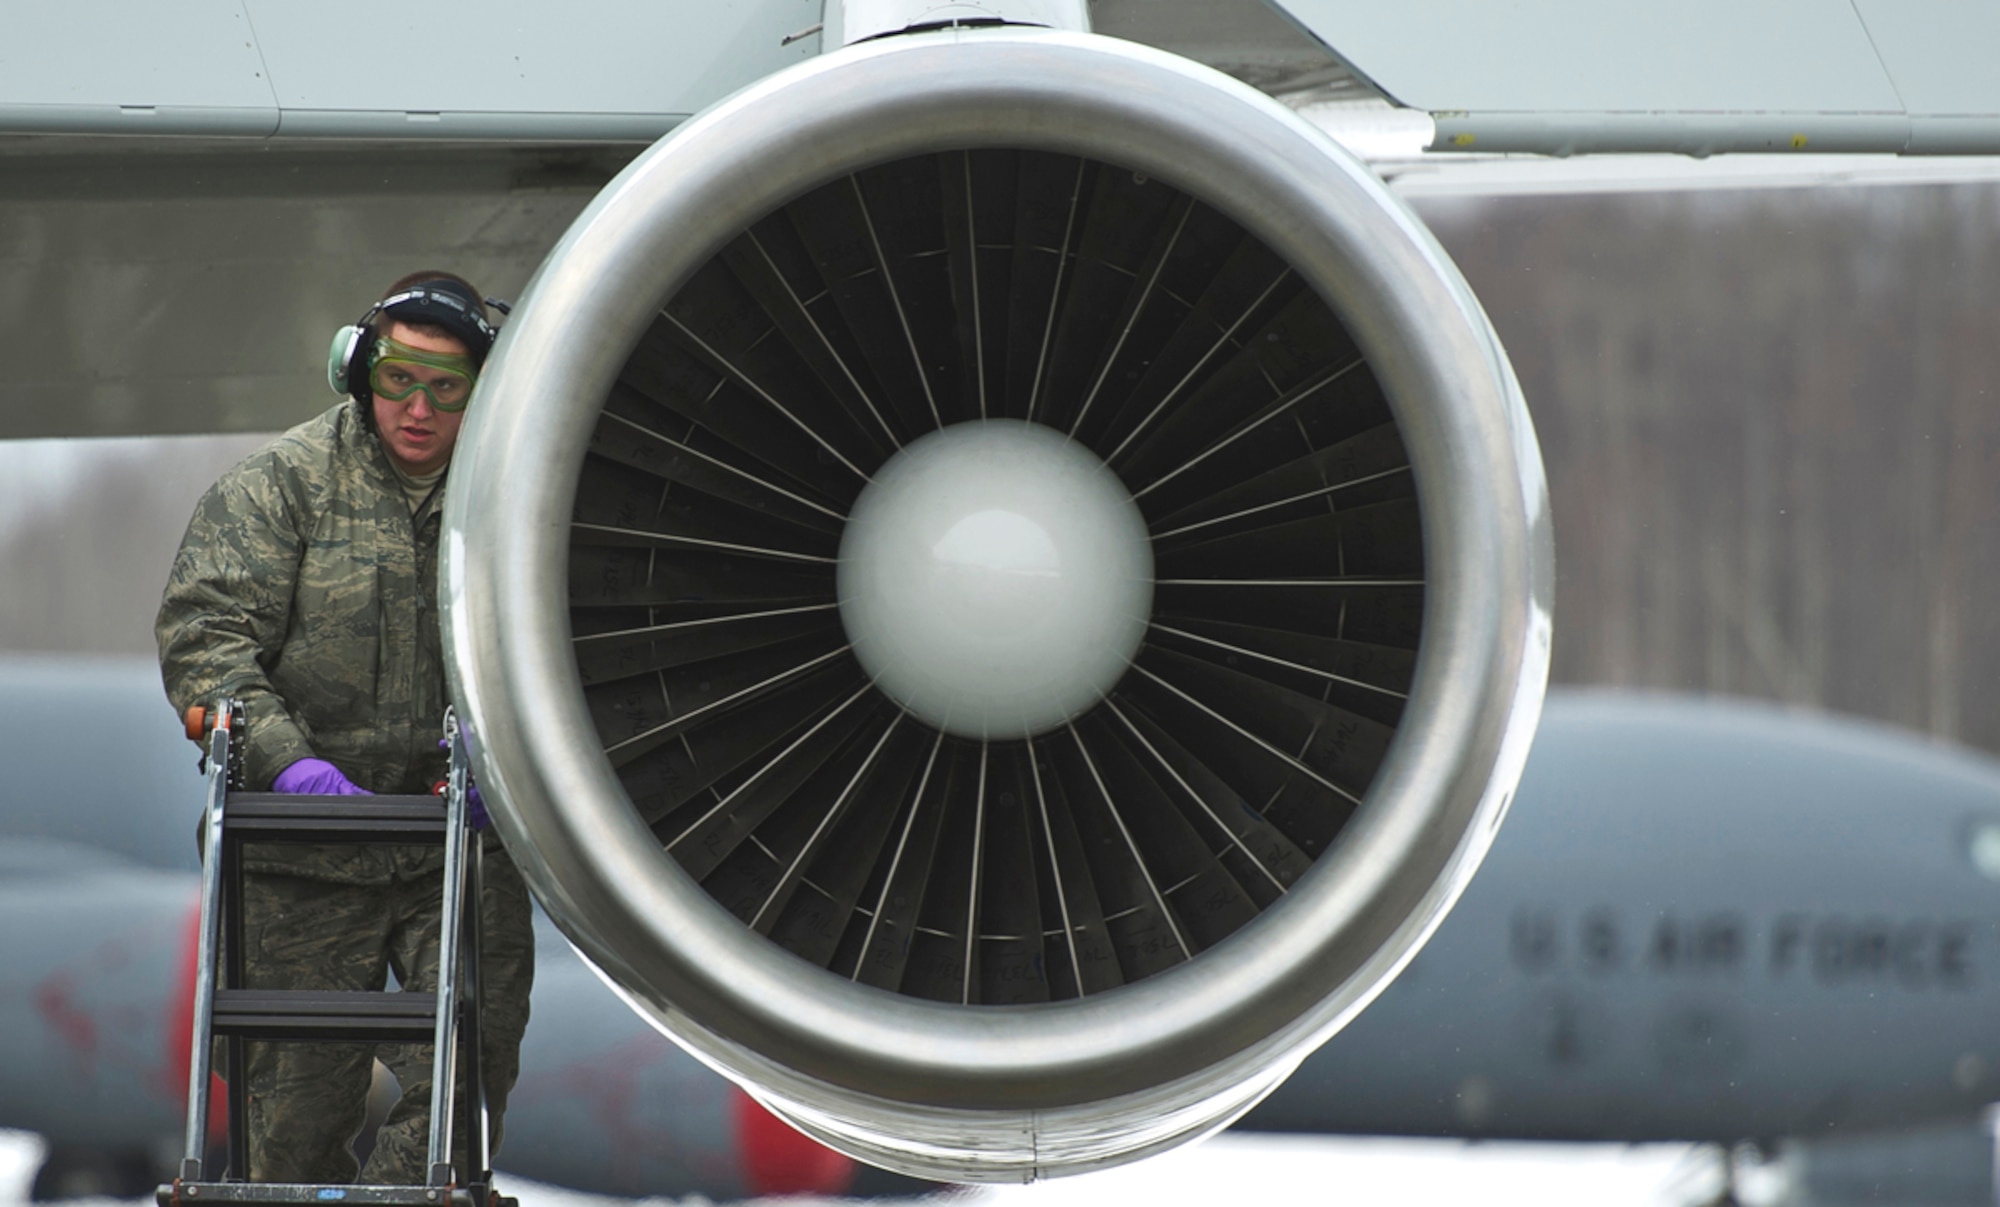 Senior Airman Kody Medrek checks an engine while performing maintenance on a E-3 Sentry Airborne Warning and Control System aircraft after a mission March 17, 2014, on Joint Base Elmendorf-Richardson, Alaska. Medrek is assigned to the 962nd Aircraft Maintenance Unit. (U.S. Air Force photo/Justin Connaher)